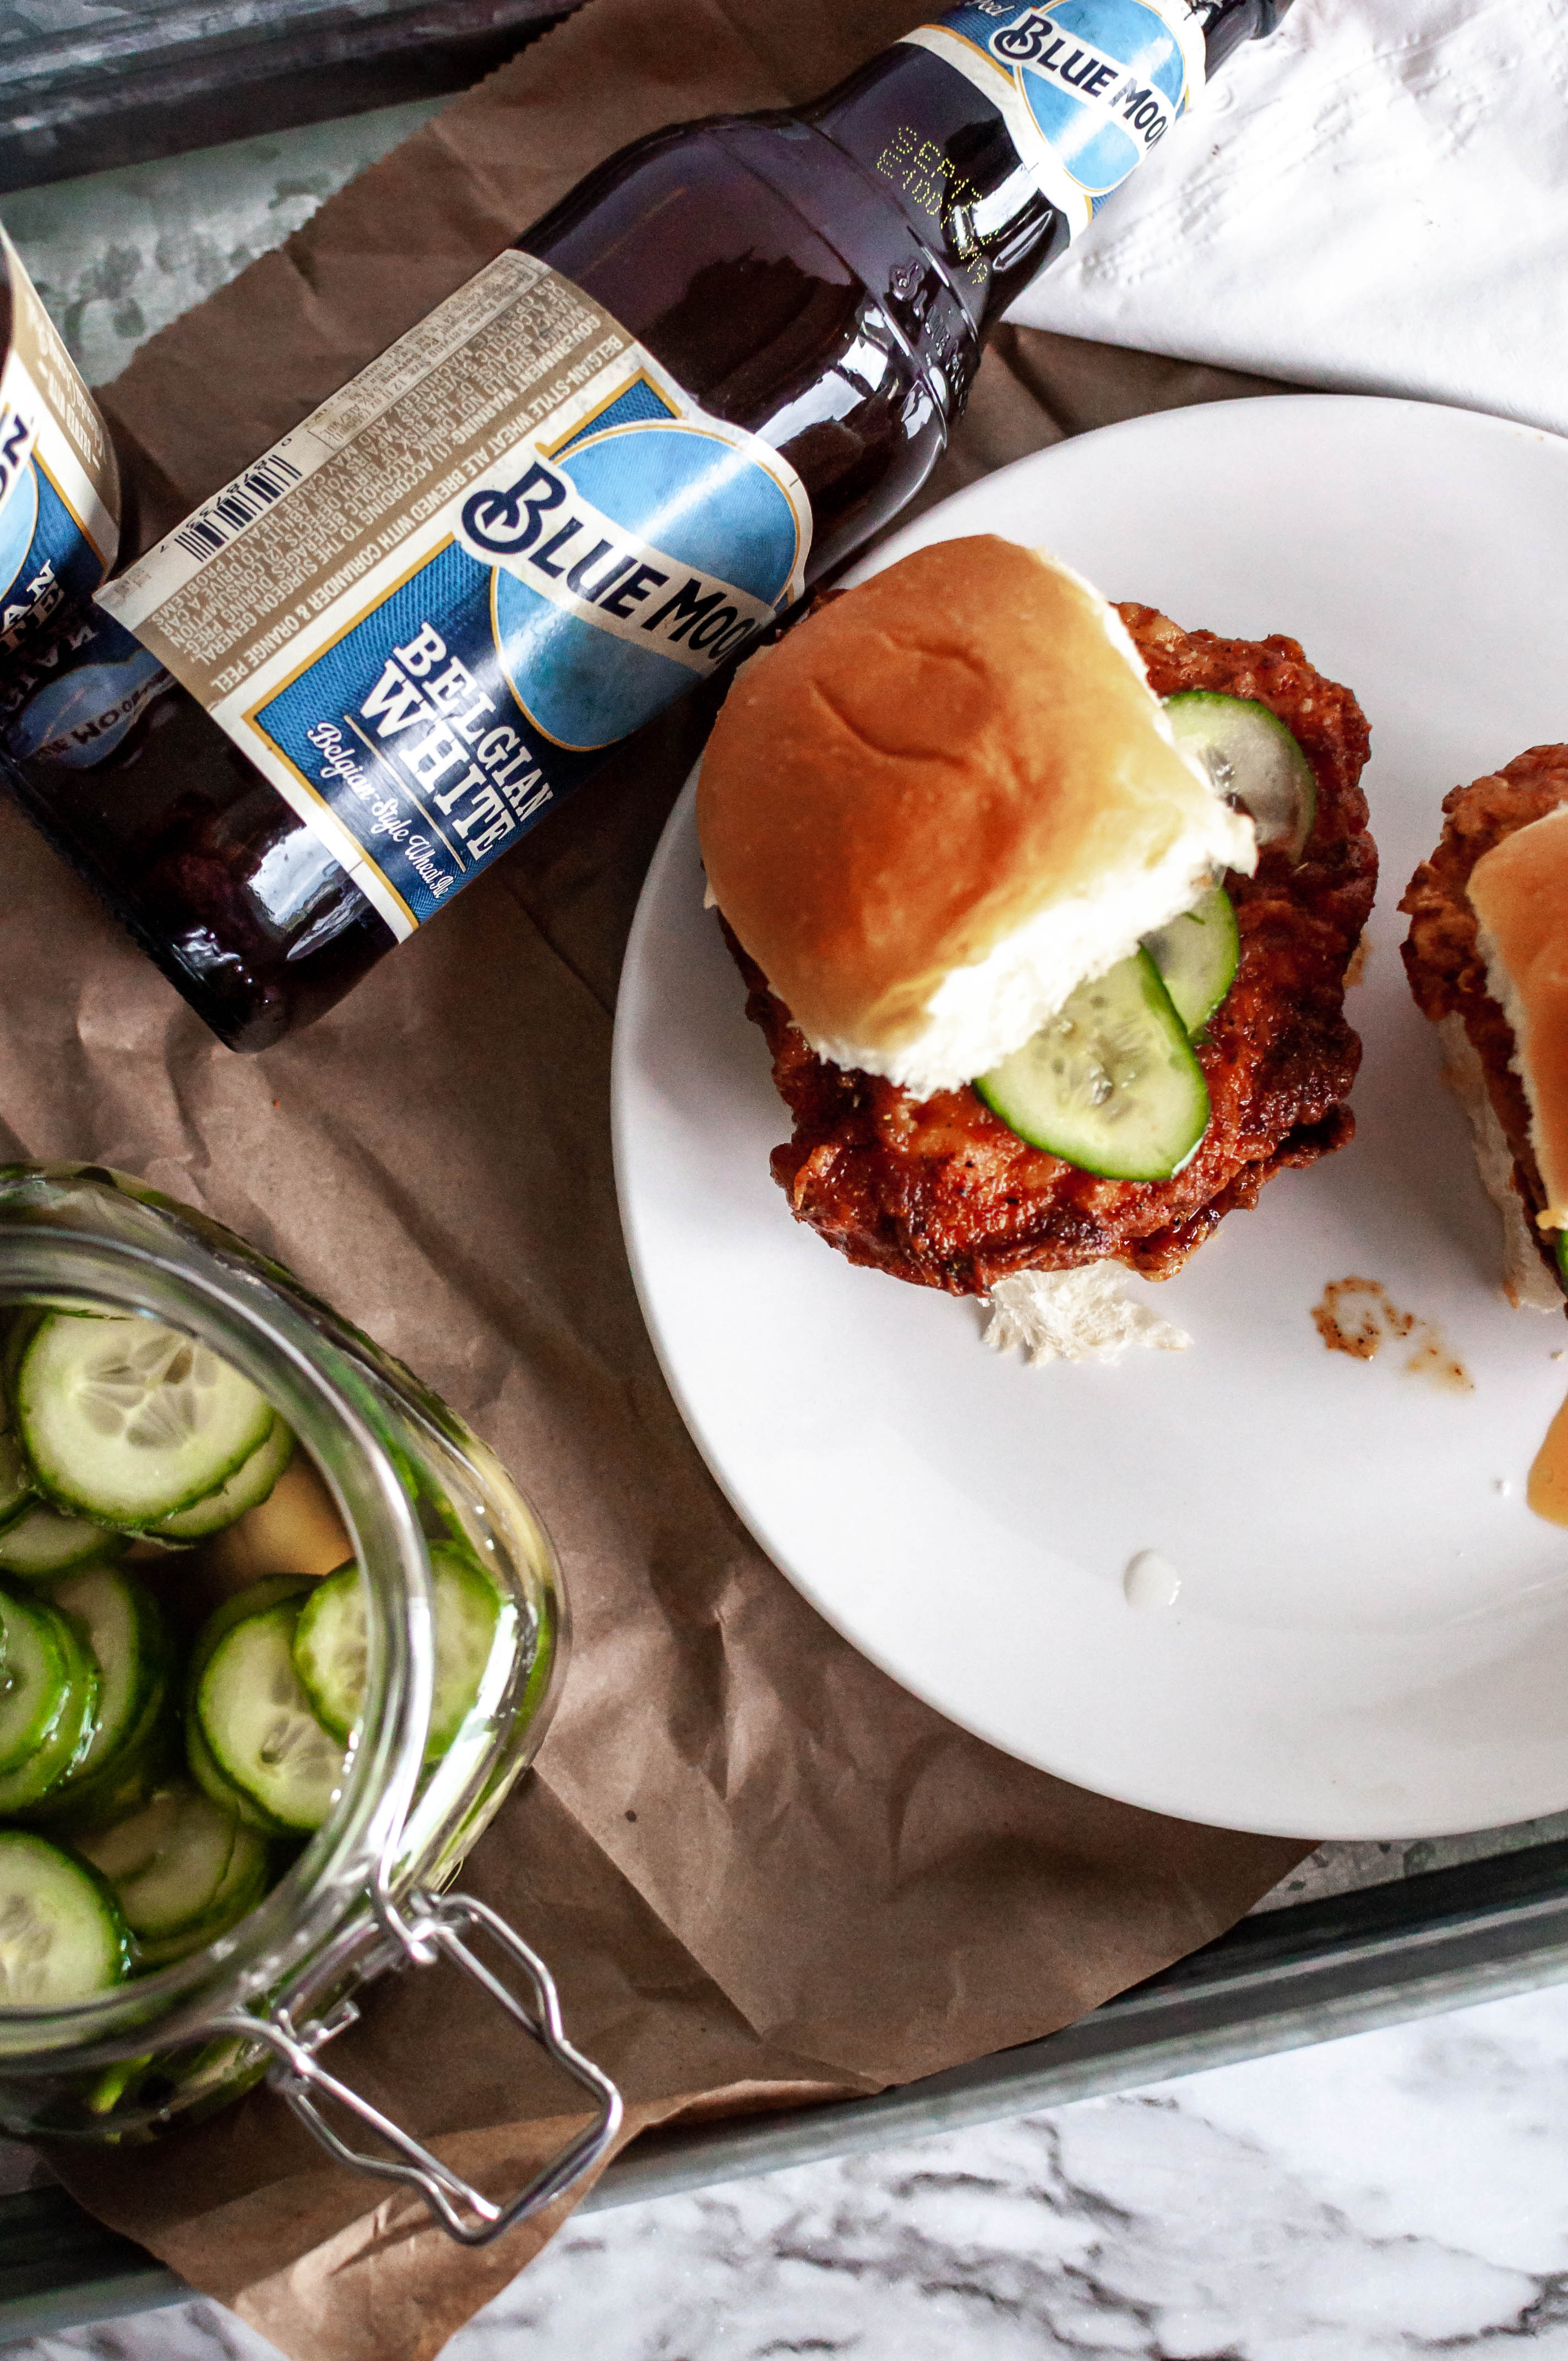 Hot Chicken Sliders with Quick Pickles are the ultimate game day food. Soft, buttery bread, crispy fried chicken, spicy sauce and fresh, crunchy pickles.